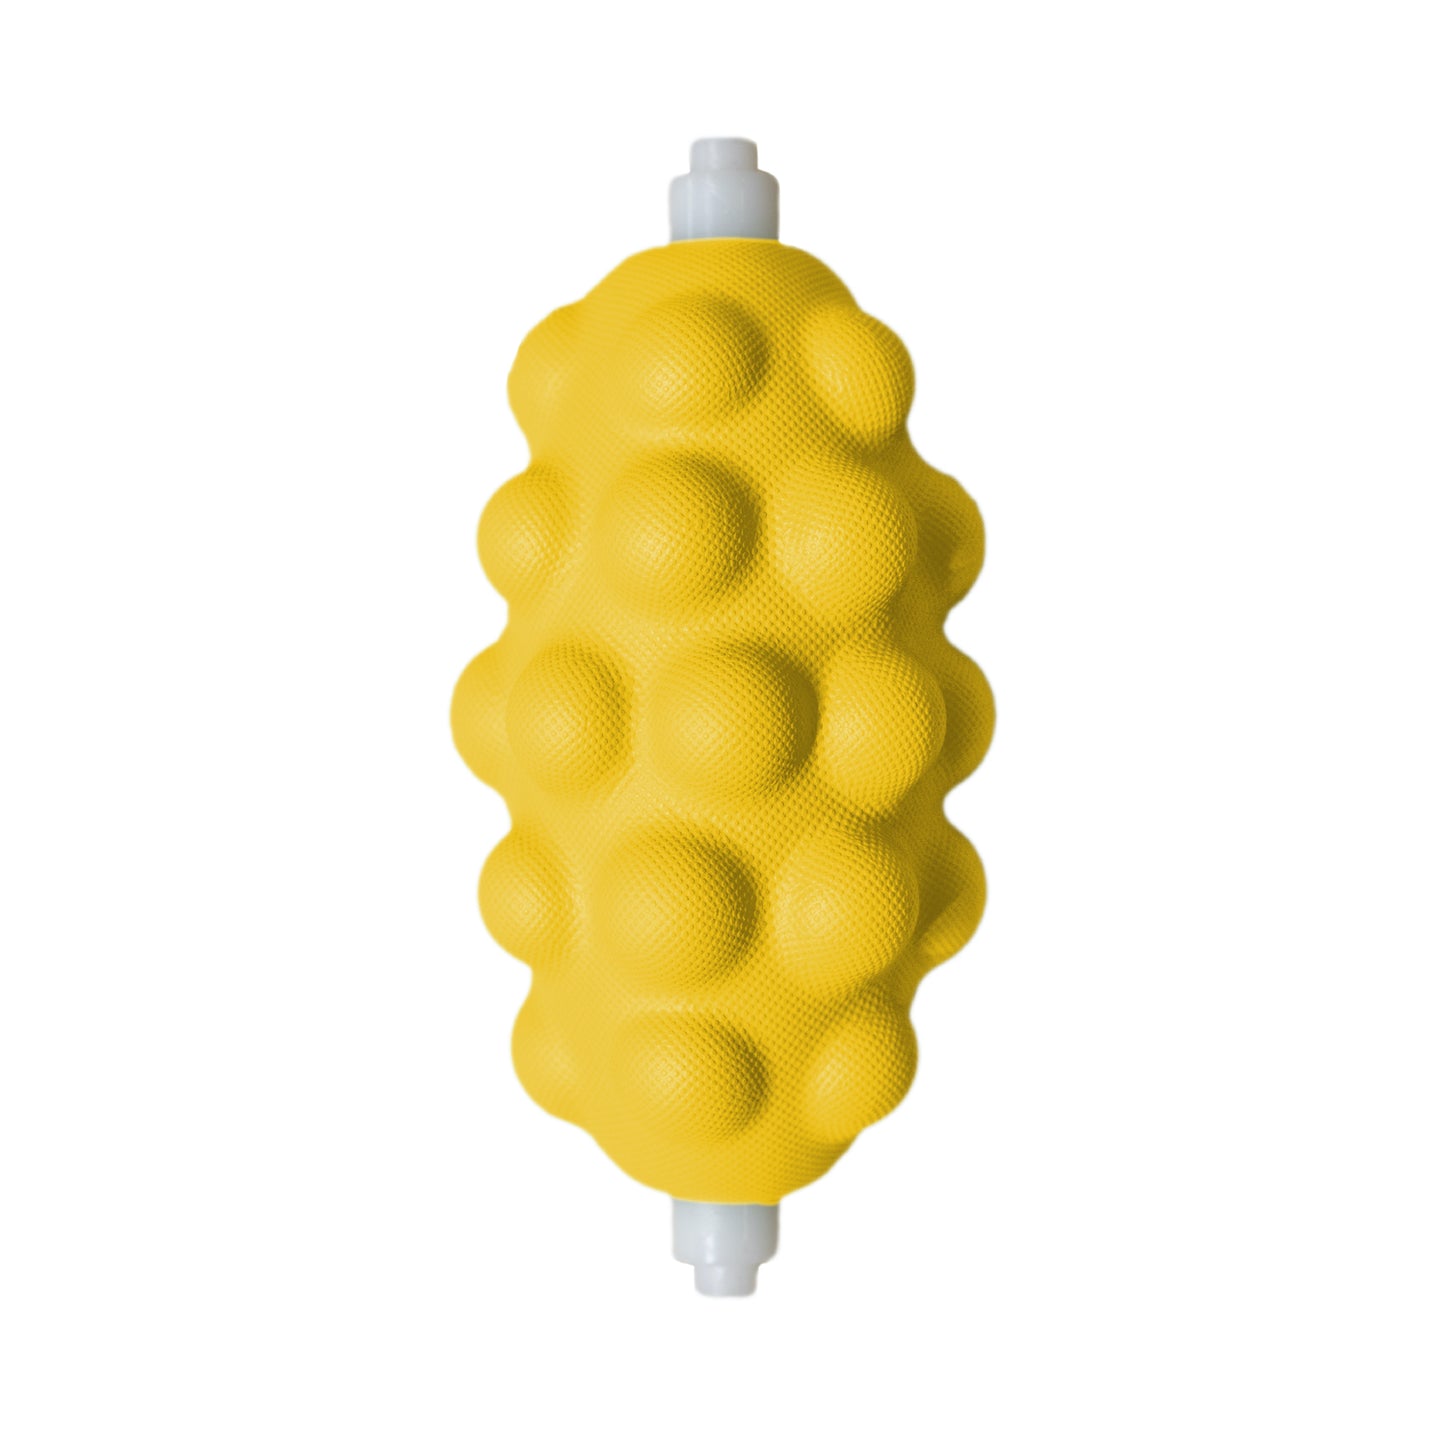 Firm Density Yellow Knobble Roller - The Most Asked for Roller